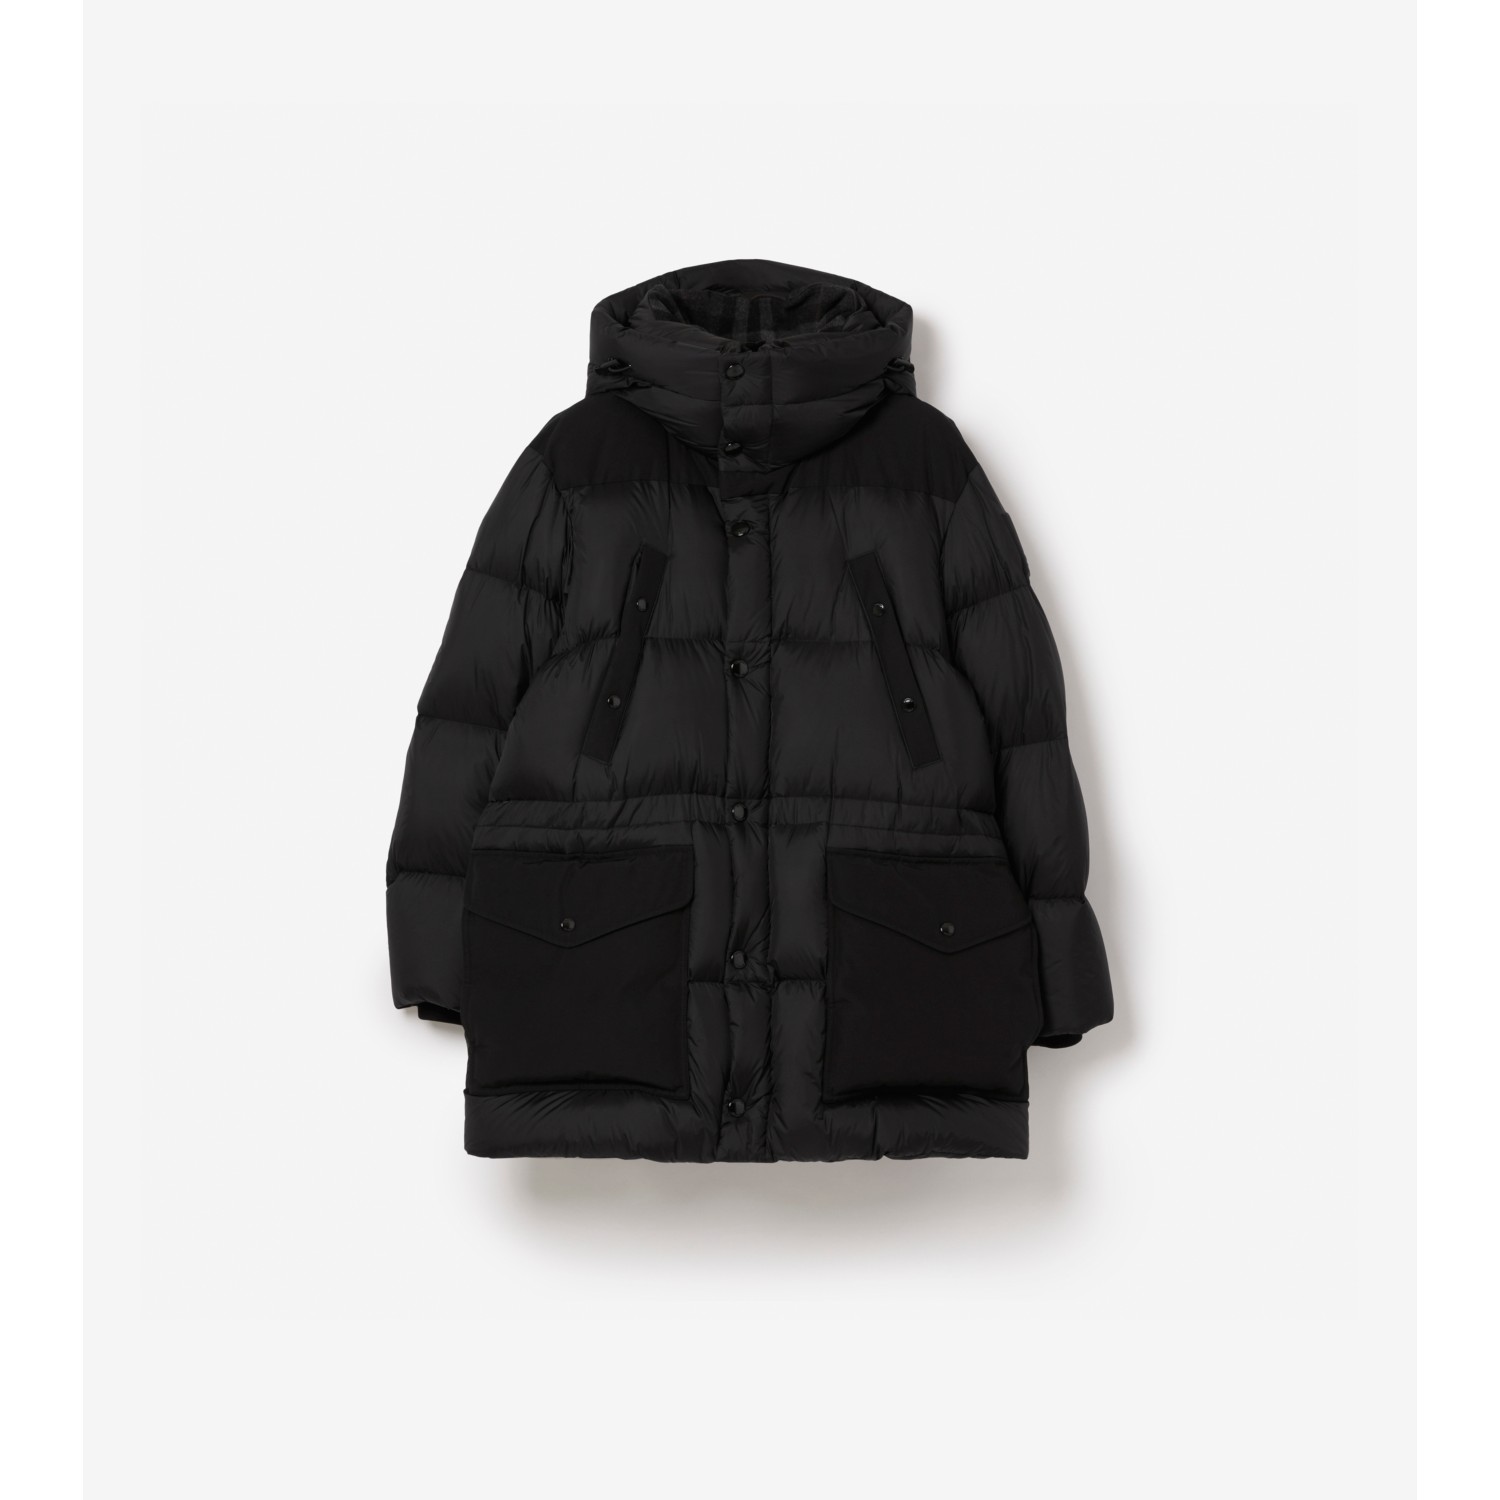 Unlock Wilderness' choice in the Burberry Vs Canada Goose comparison, the Logo Appliqué Nylon Puffer Coat by Burberry